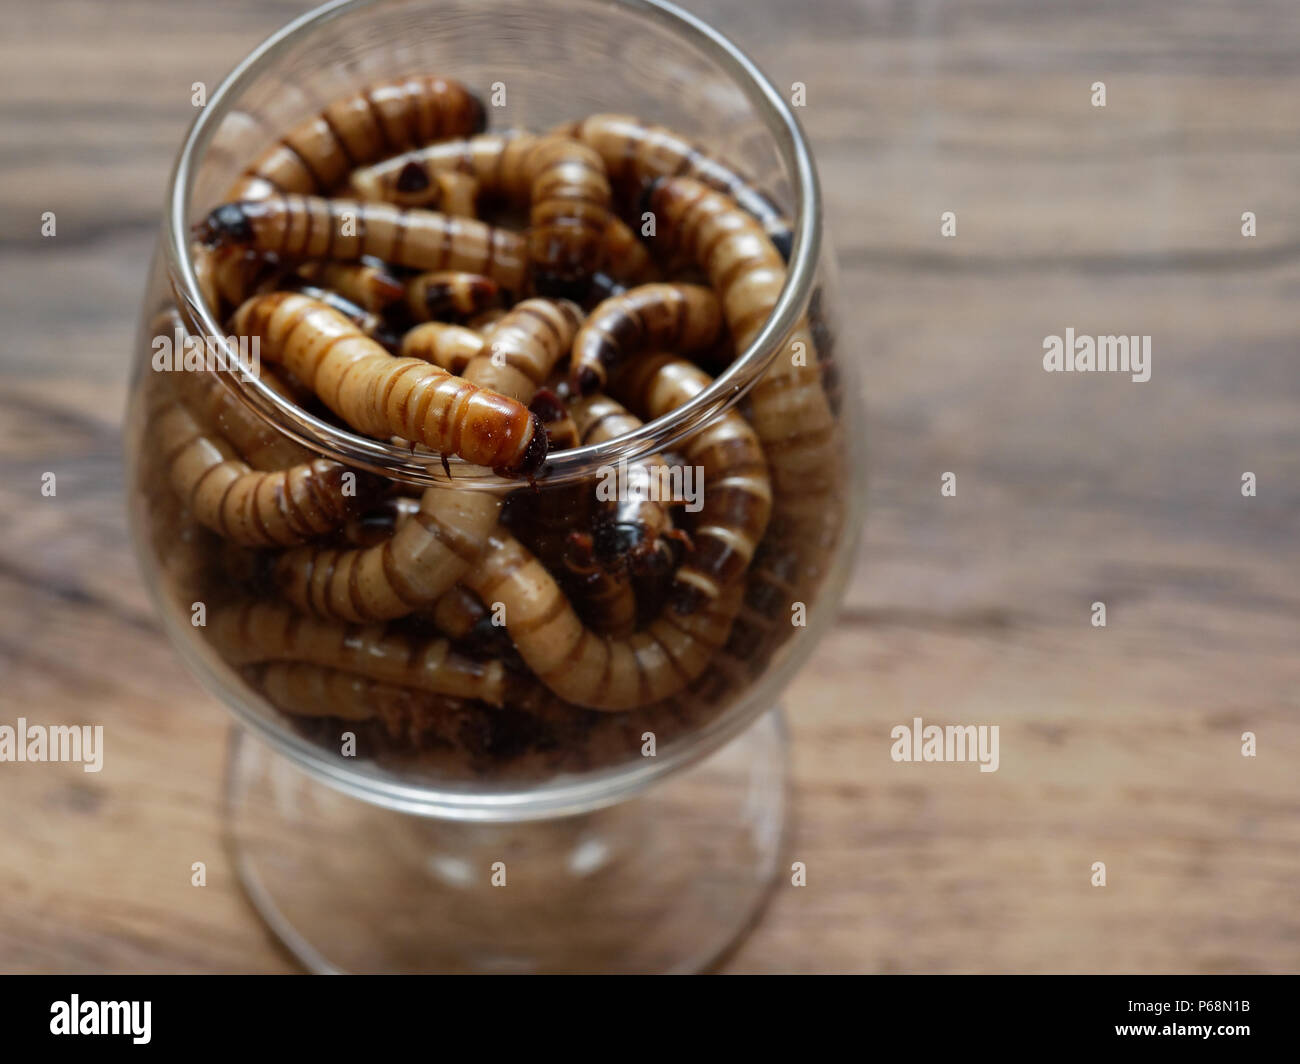 A group of super or giant worms crawl inside small brandy glass over dark wooden surface used as background in exotic pet food, insect, Halloween, celebration, decoration, scary, and haunting concepts Stock Photo